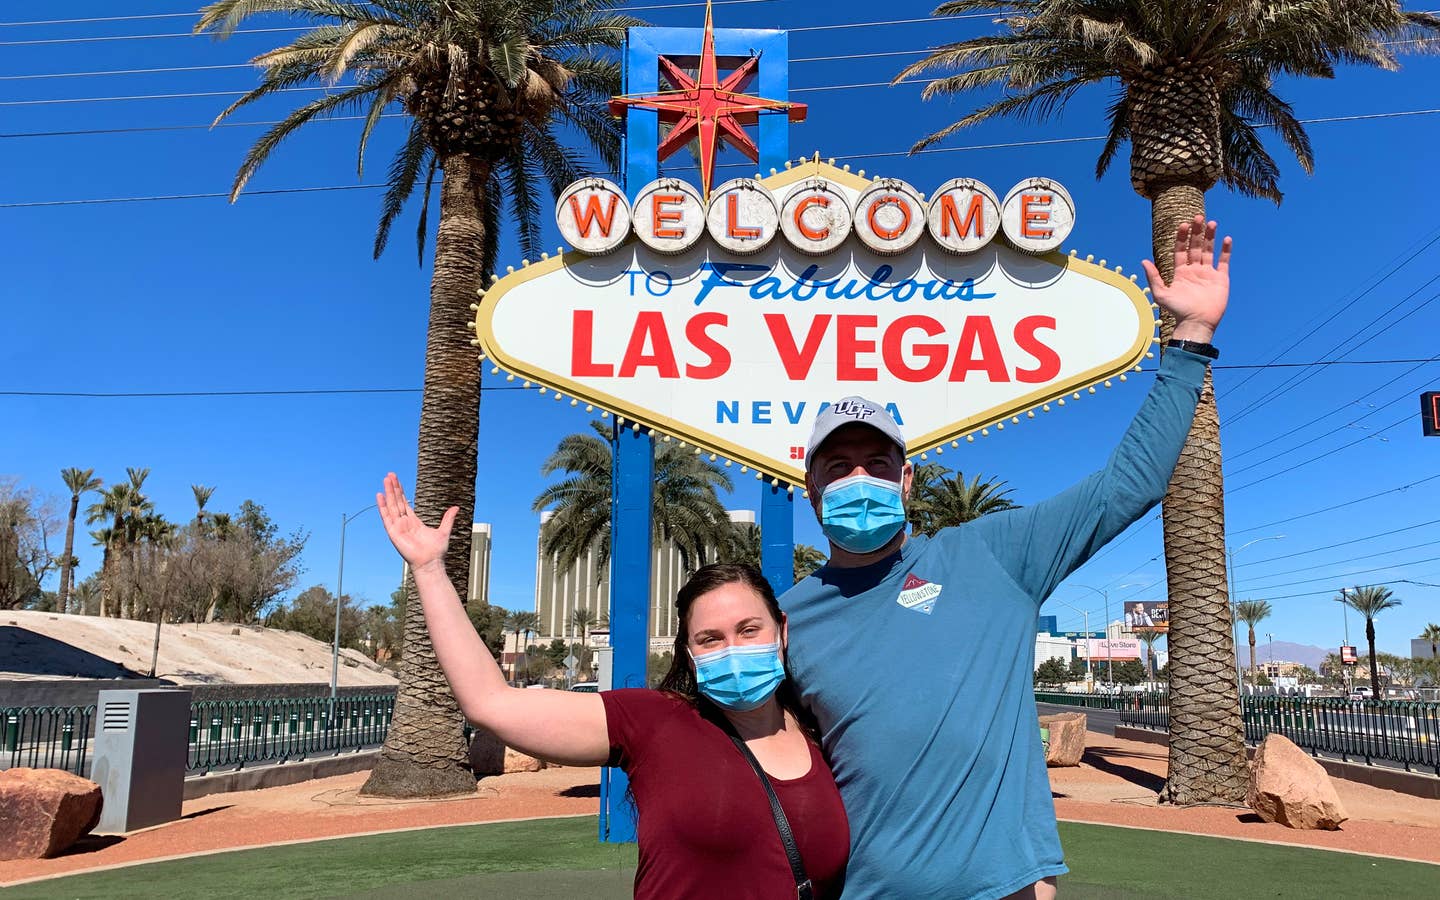 Featured Contributor, Ashley Fraboni (left) and her fiancé, Nicholas (right), pose in front of the 'Welcome to Las Vegas' marquee while wearing face masks.